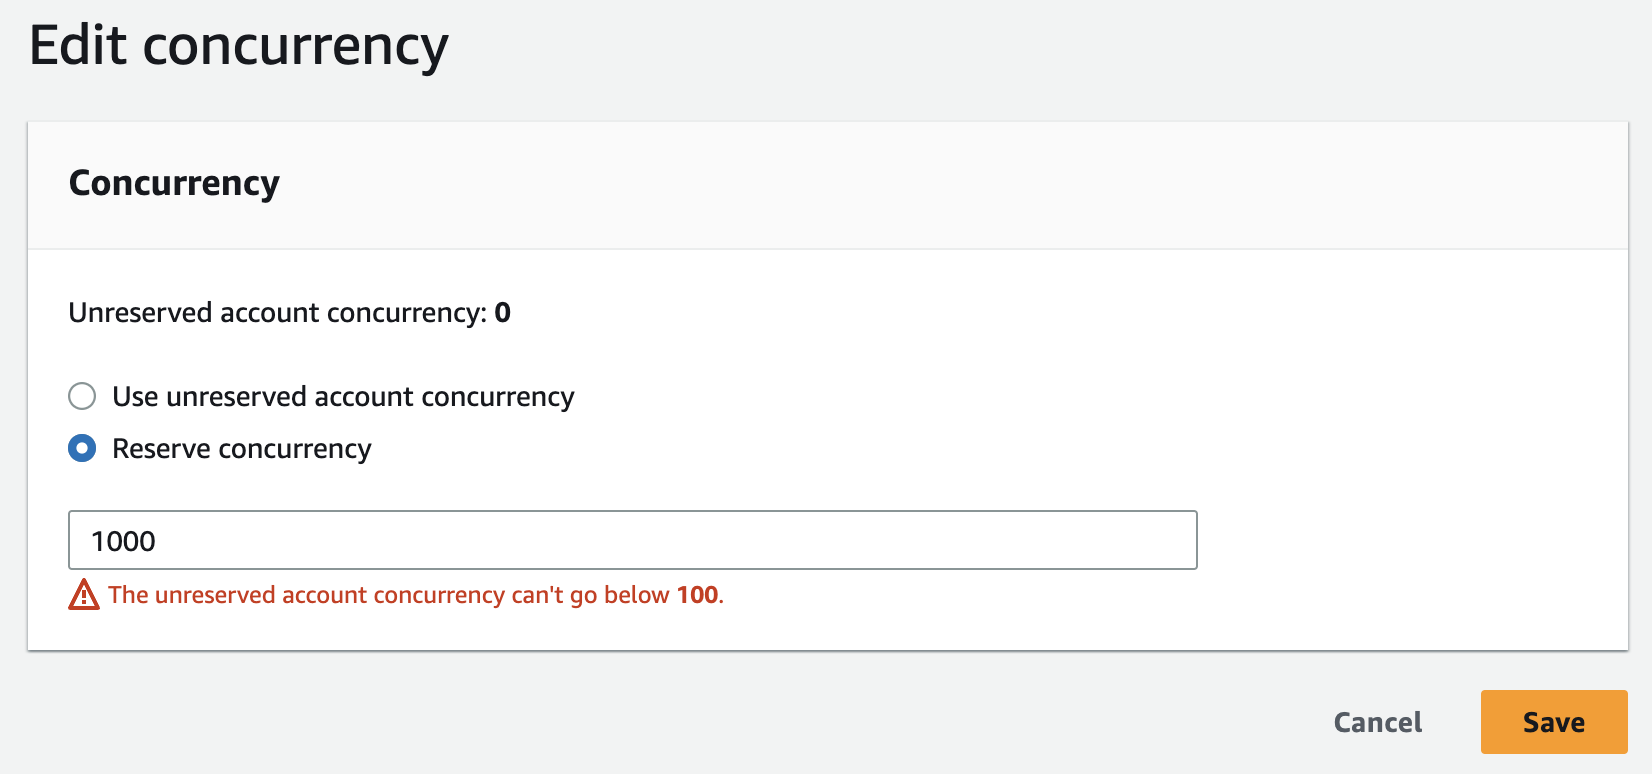 
        An error occurs if you try to reserve too much concurrency.
      